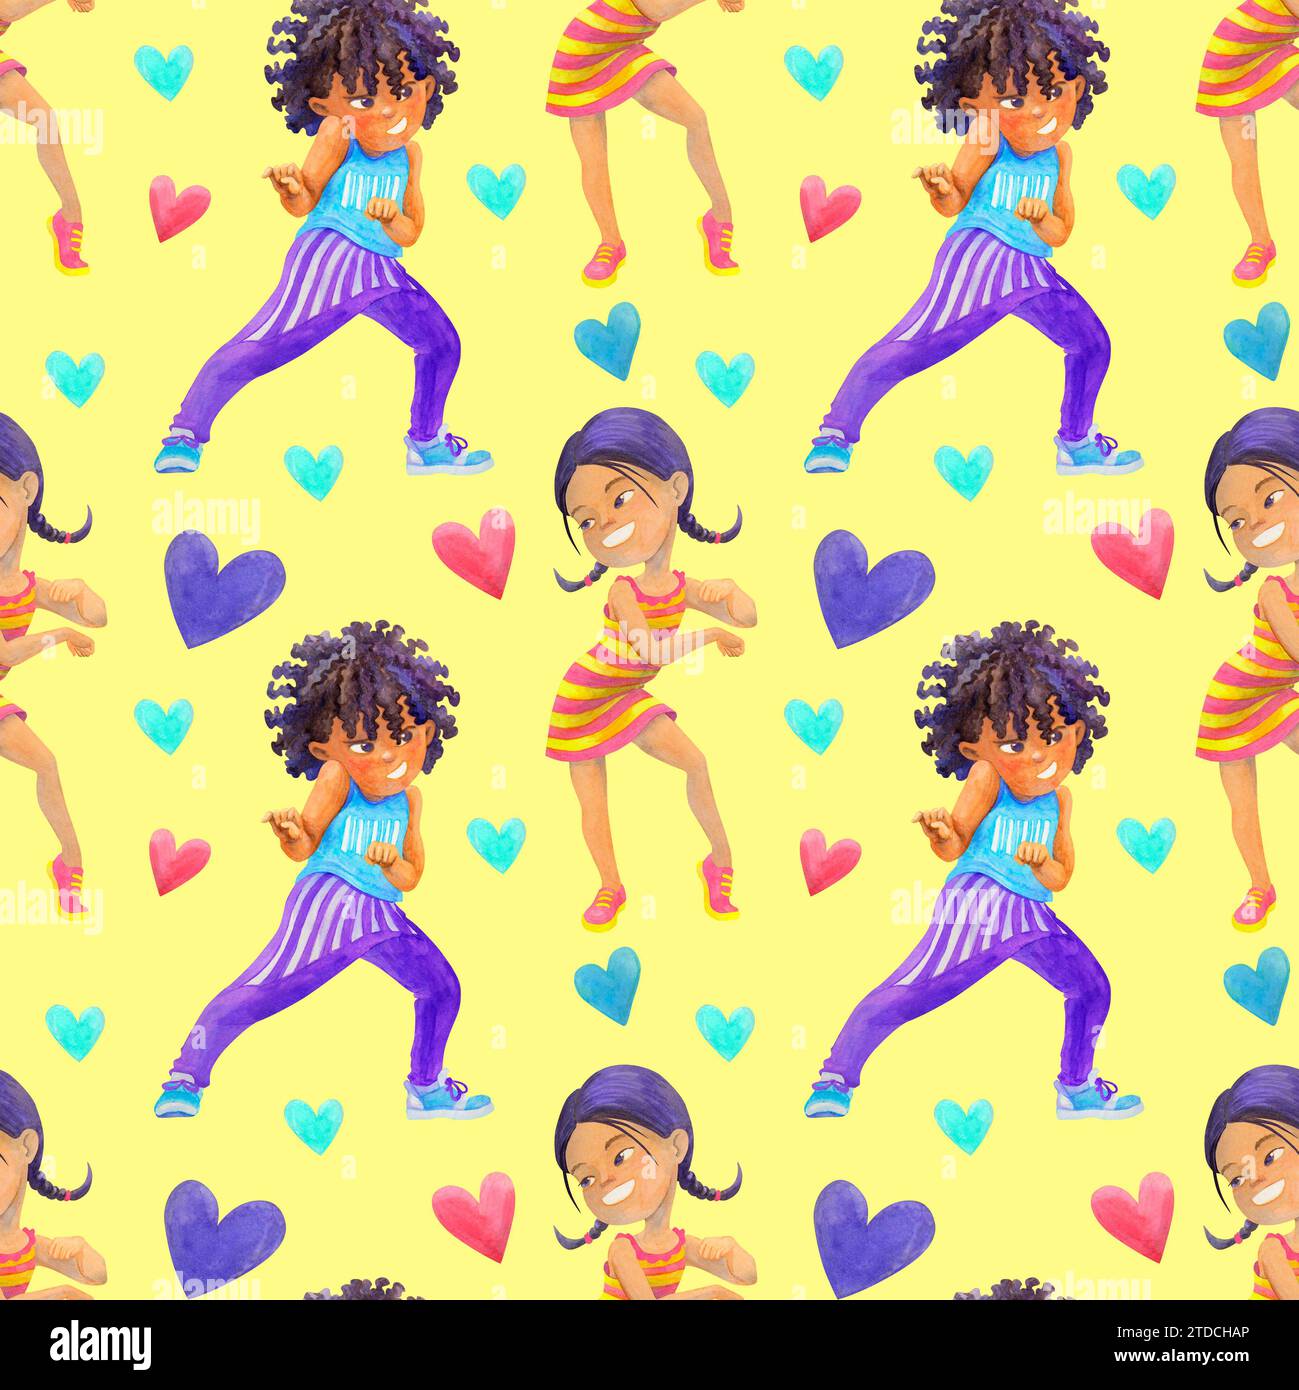 Cartoon seamless pattern with happy boys and girls dancing and having fun in kids party. Celebrating concept. Creative children decor for fabrics Stock Photo